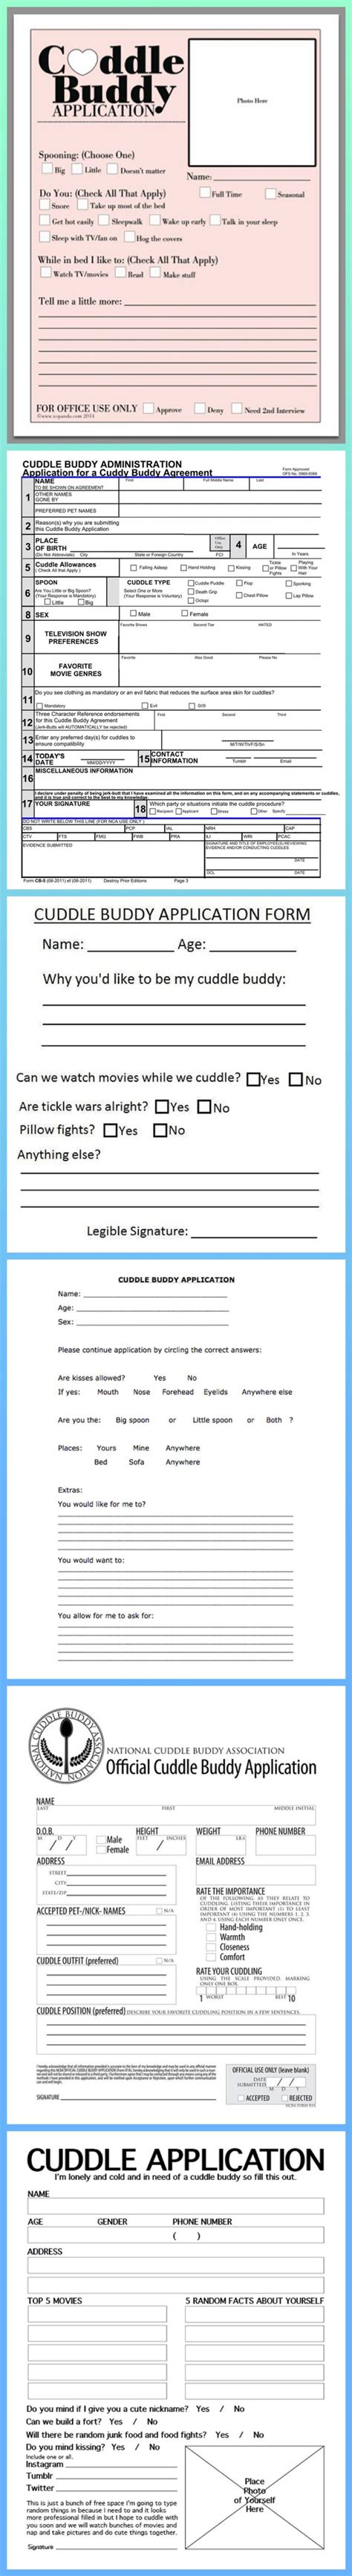 How does anyone find love? Cuddle Buddy Application Forms | Cuddle buddy application ...